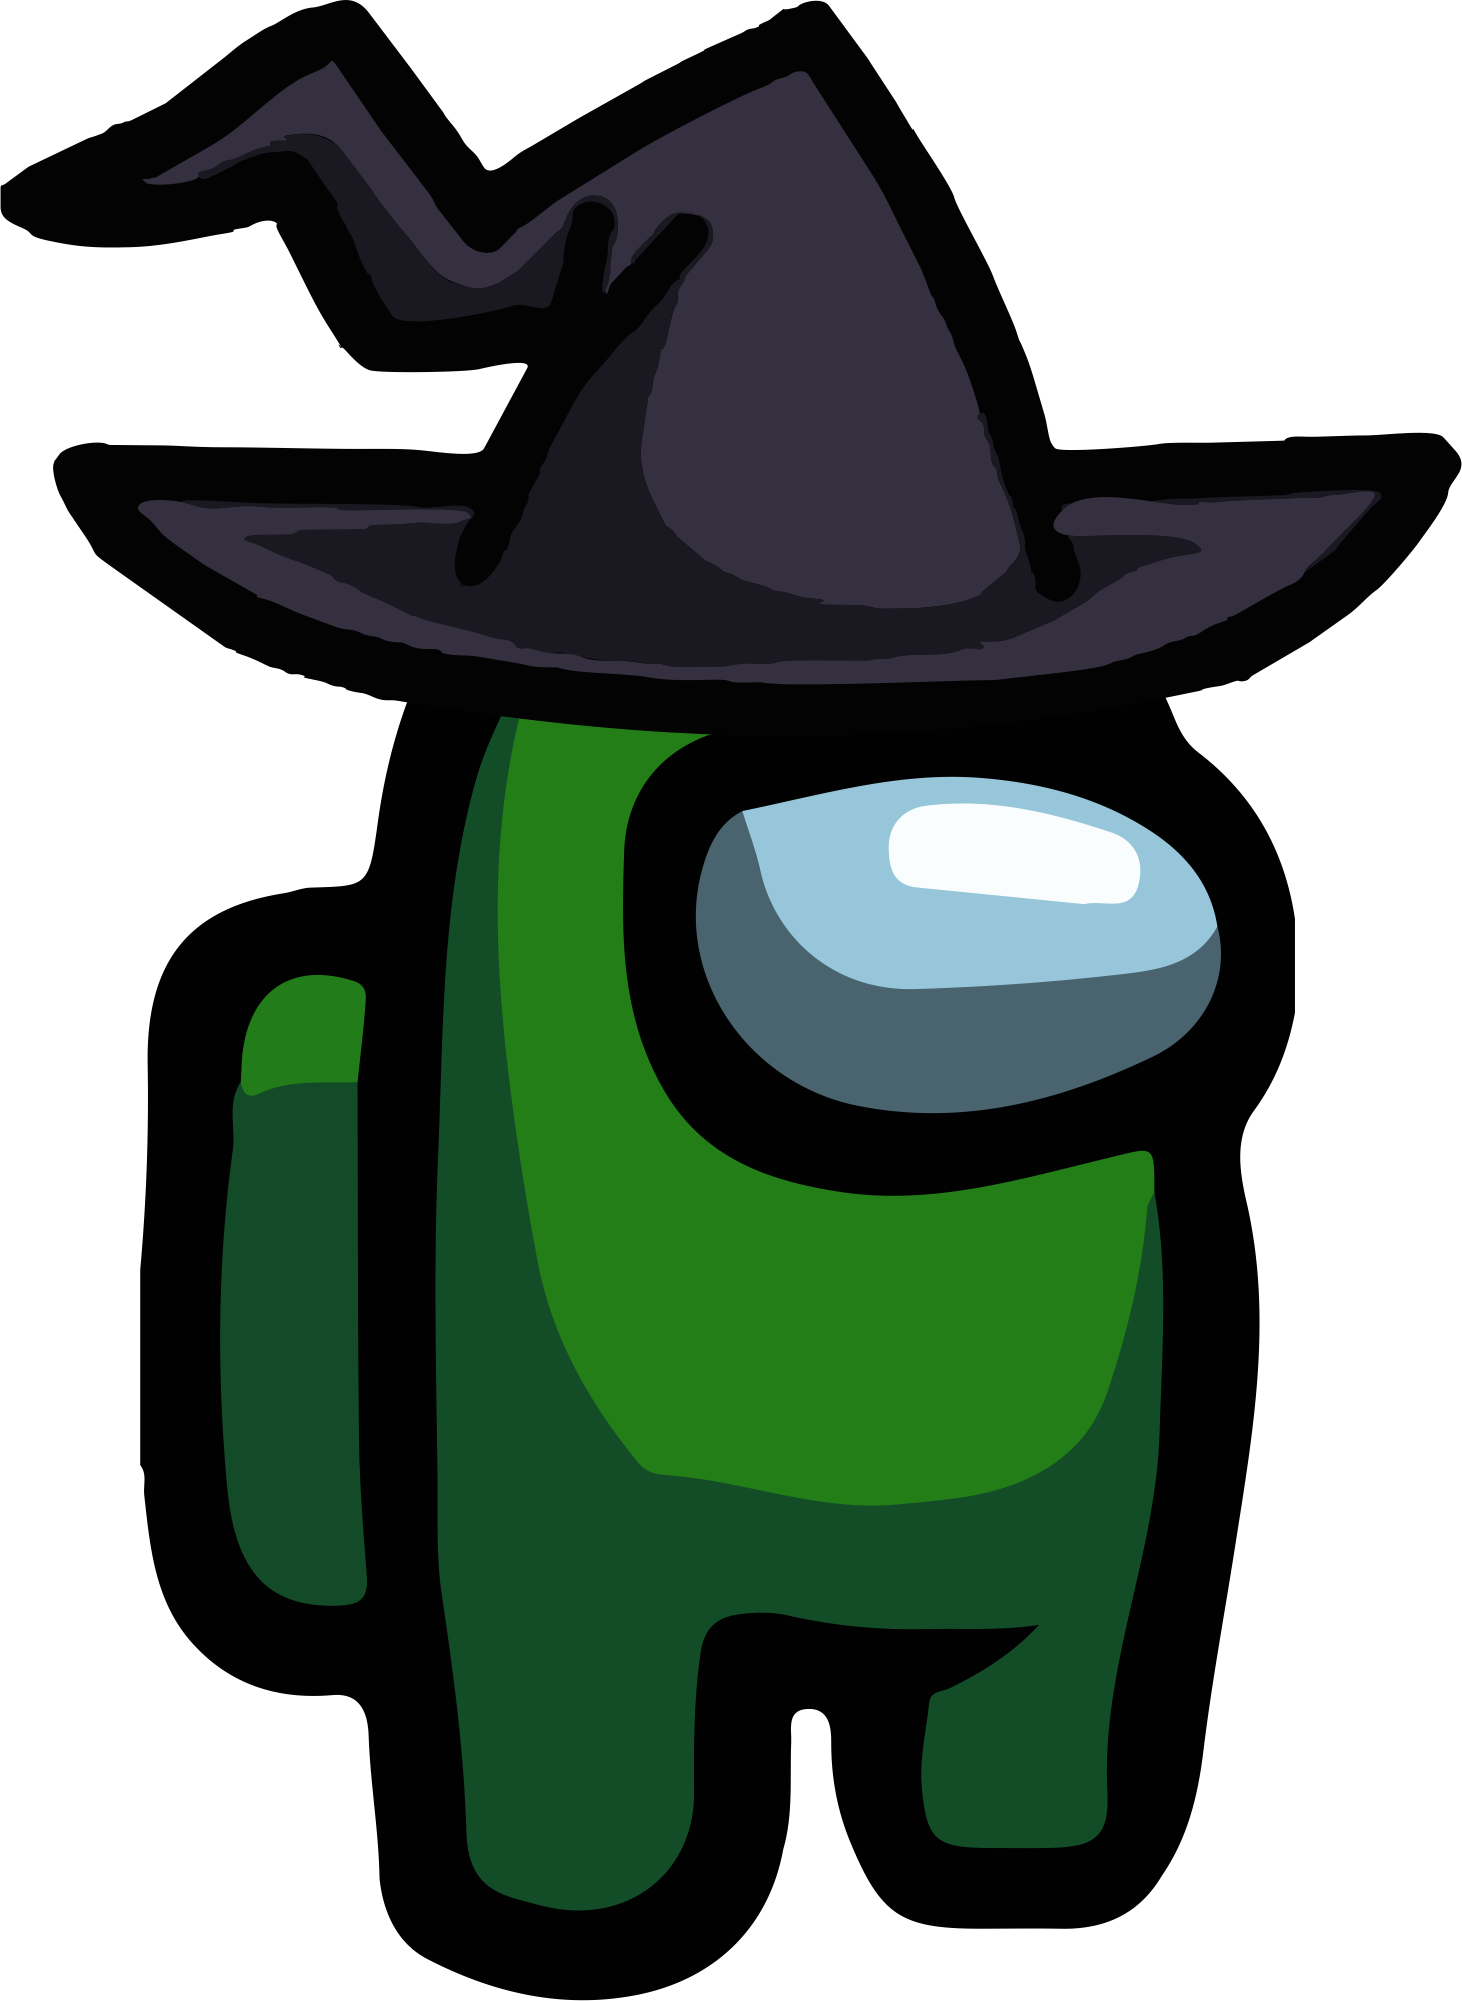 among-us-green-witch-hat-png-01